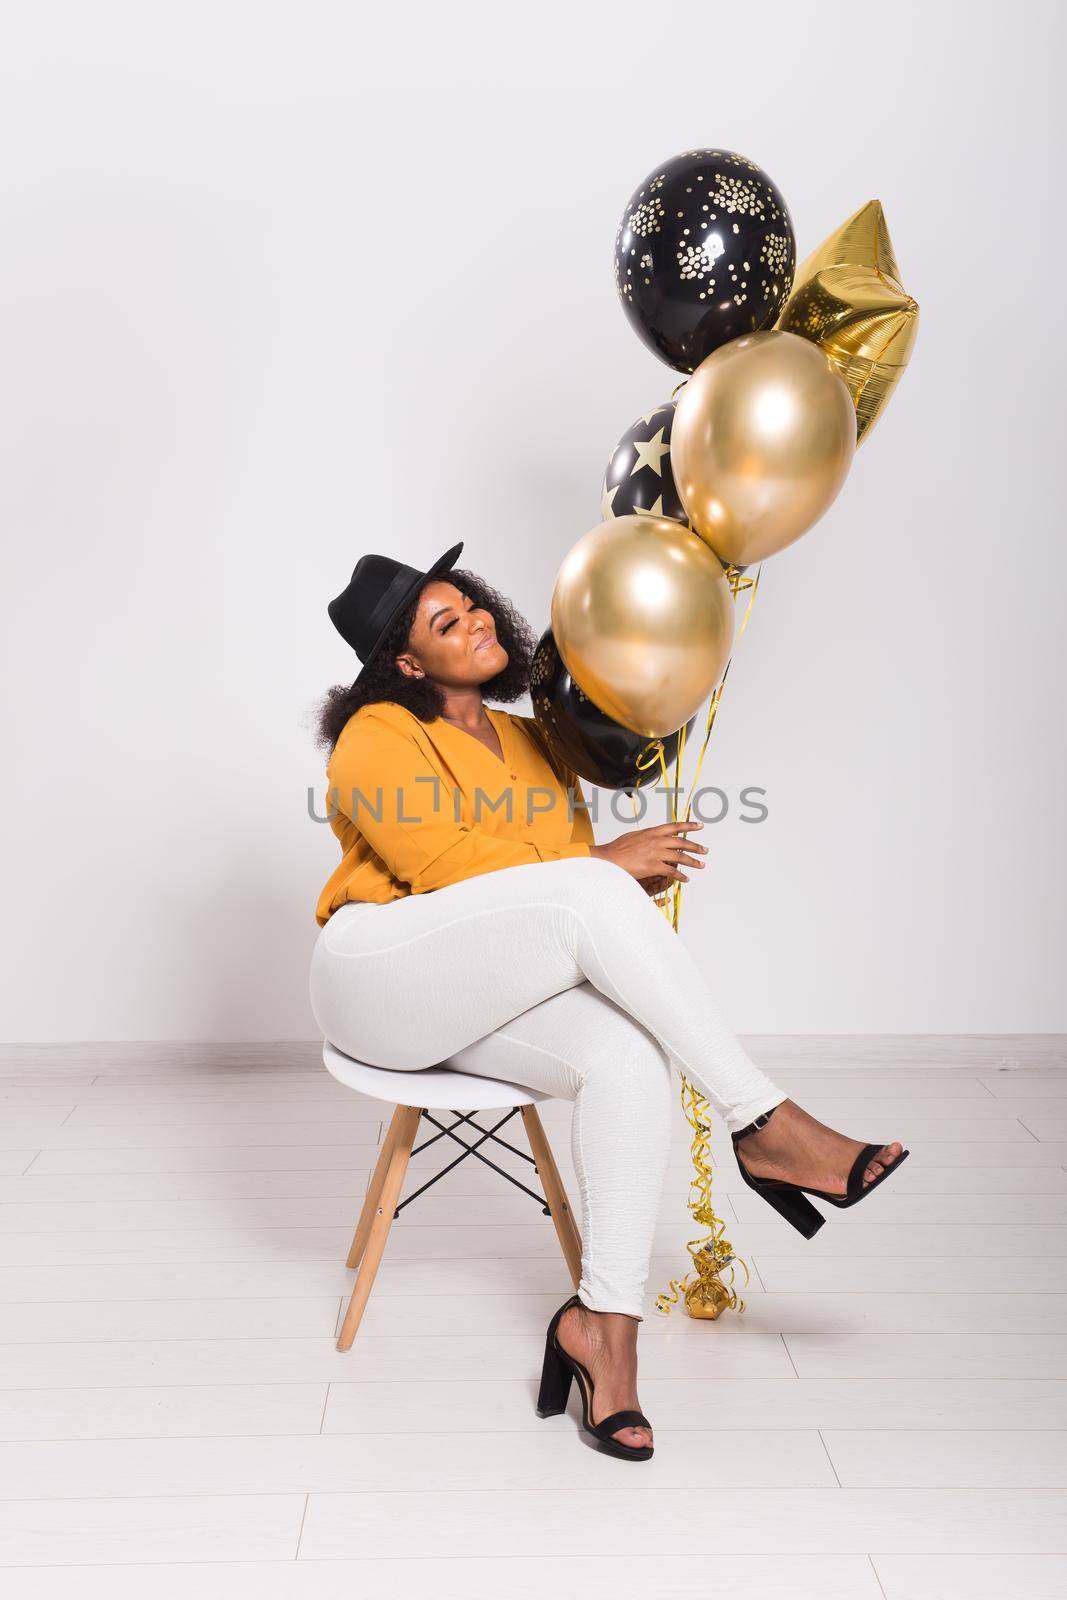 Holidays, party and fun concept - Portrait of smiling young African-American young woman looking stylish on white background with balloons. by Satura86